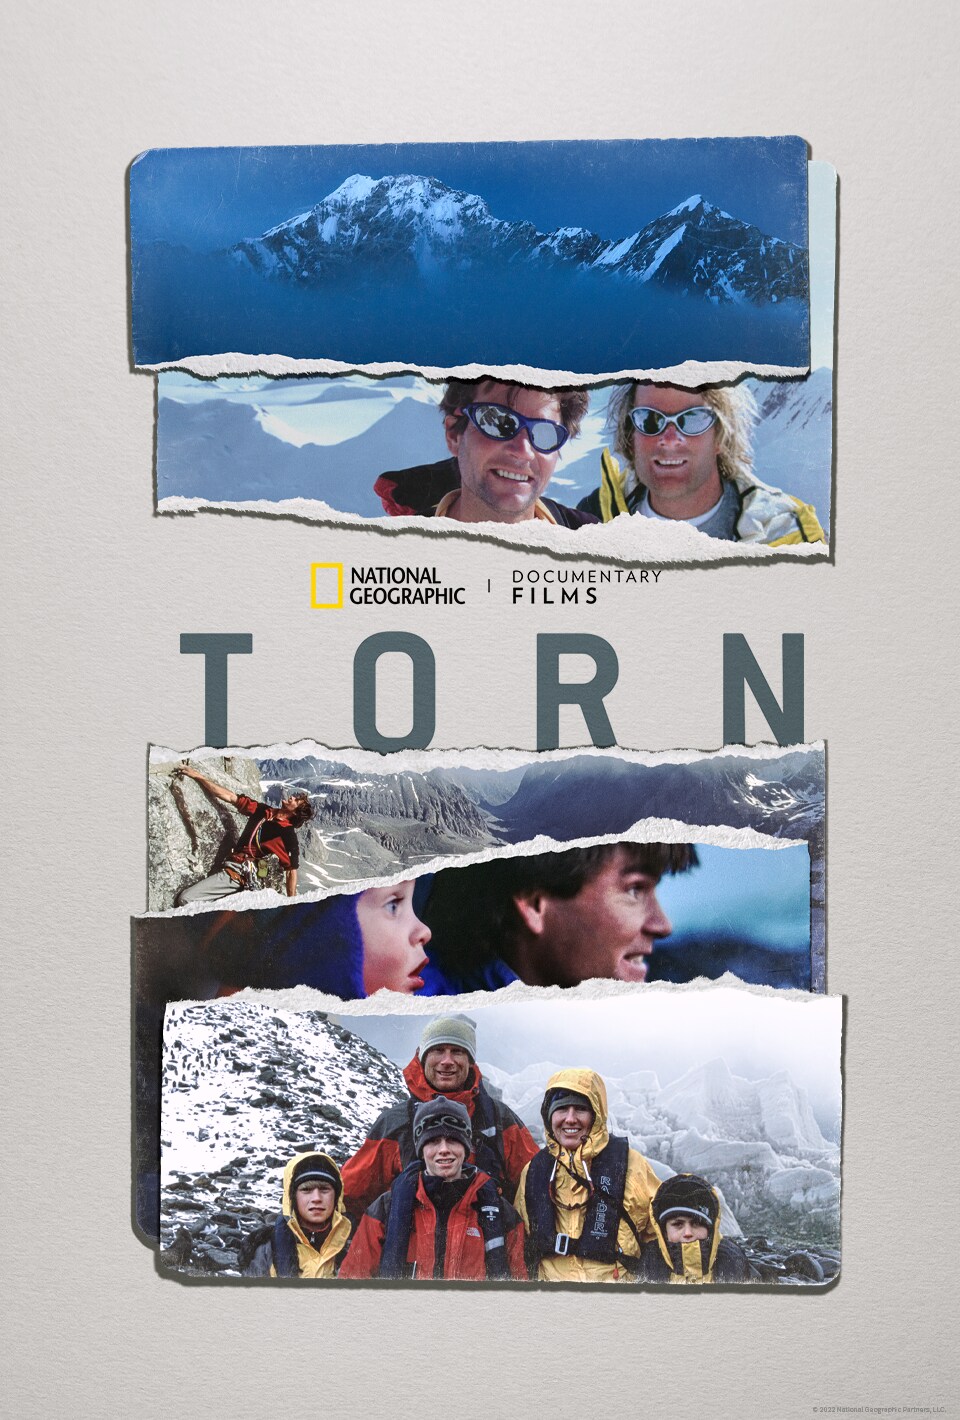 National Geographic's Torn poster